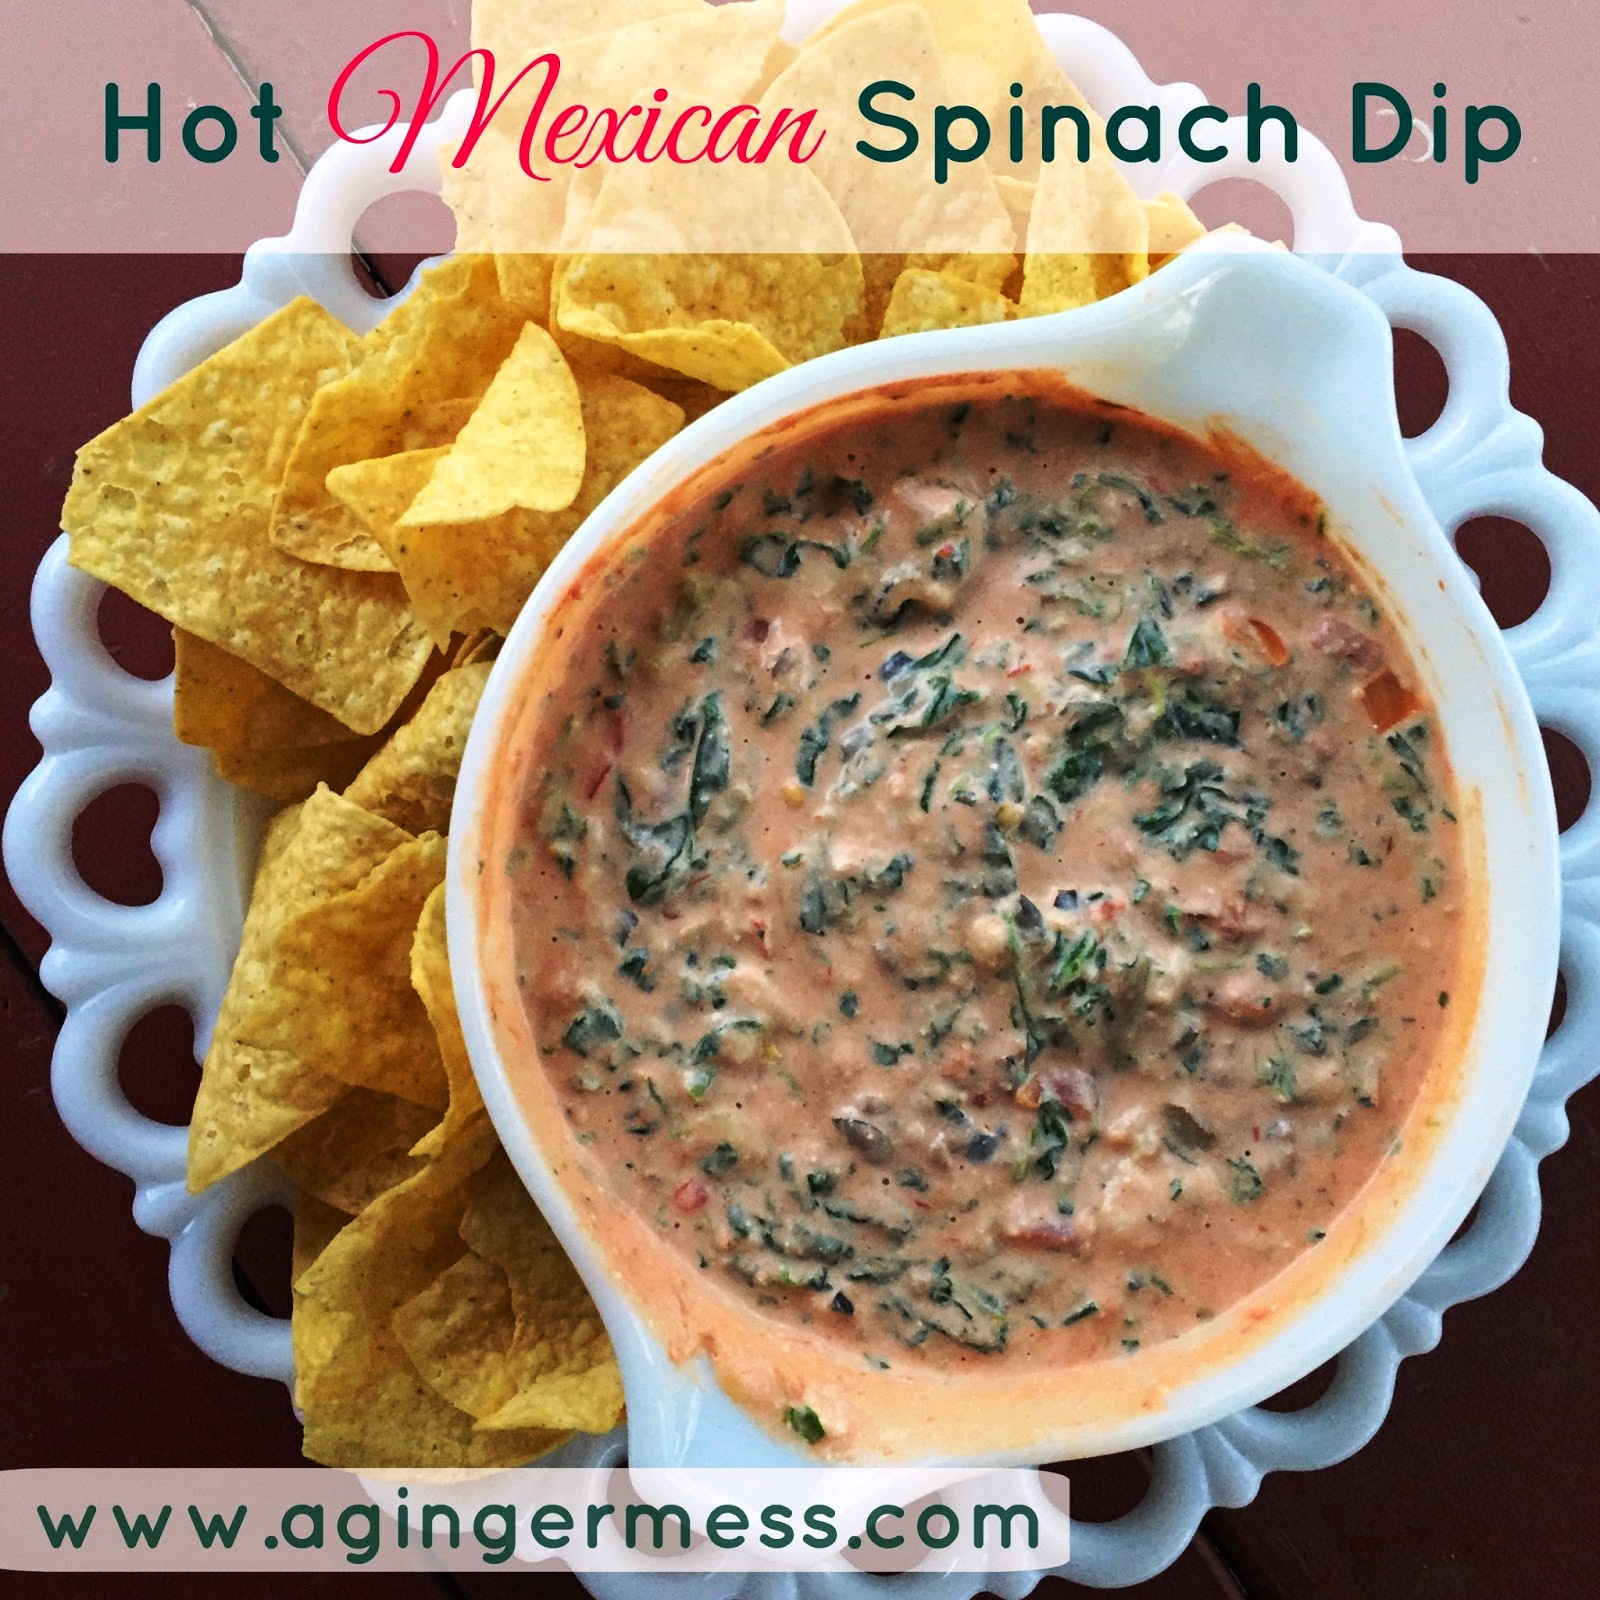 The Bestest Recipes Online: Hot Mexican Spinach Dip